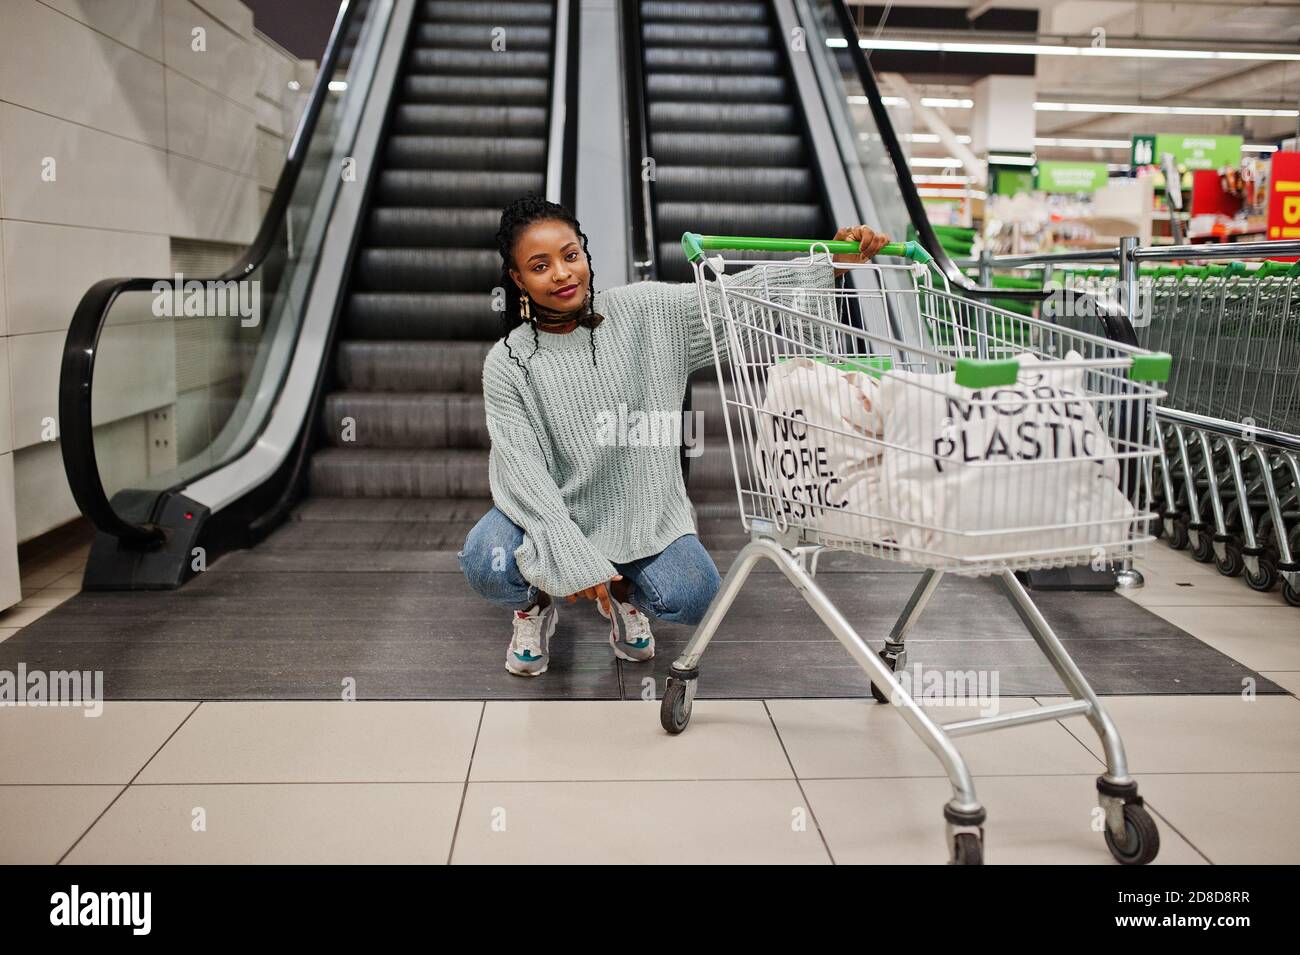 No more plastic. African woman with shopping cart trolley posed at ...